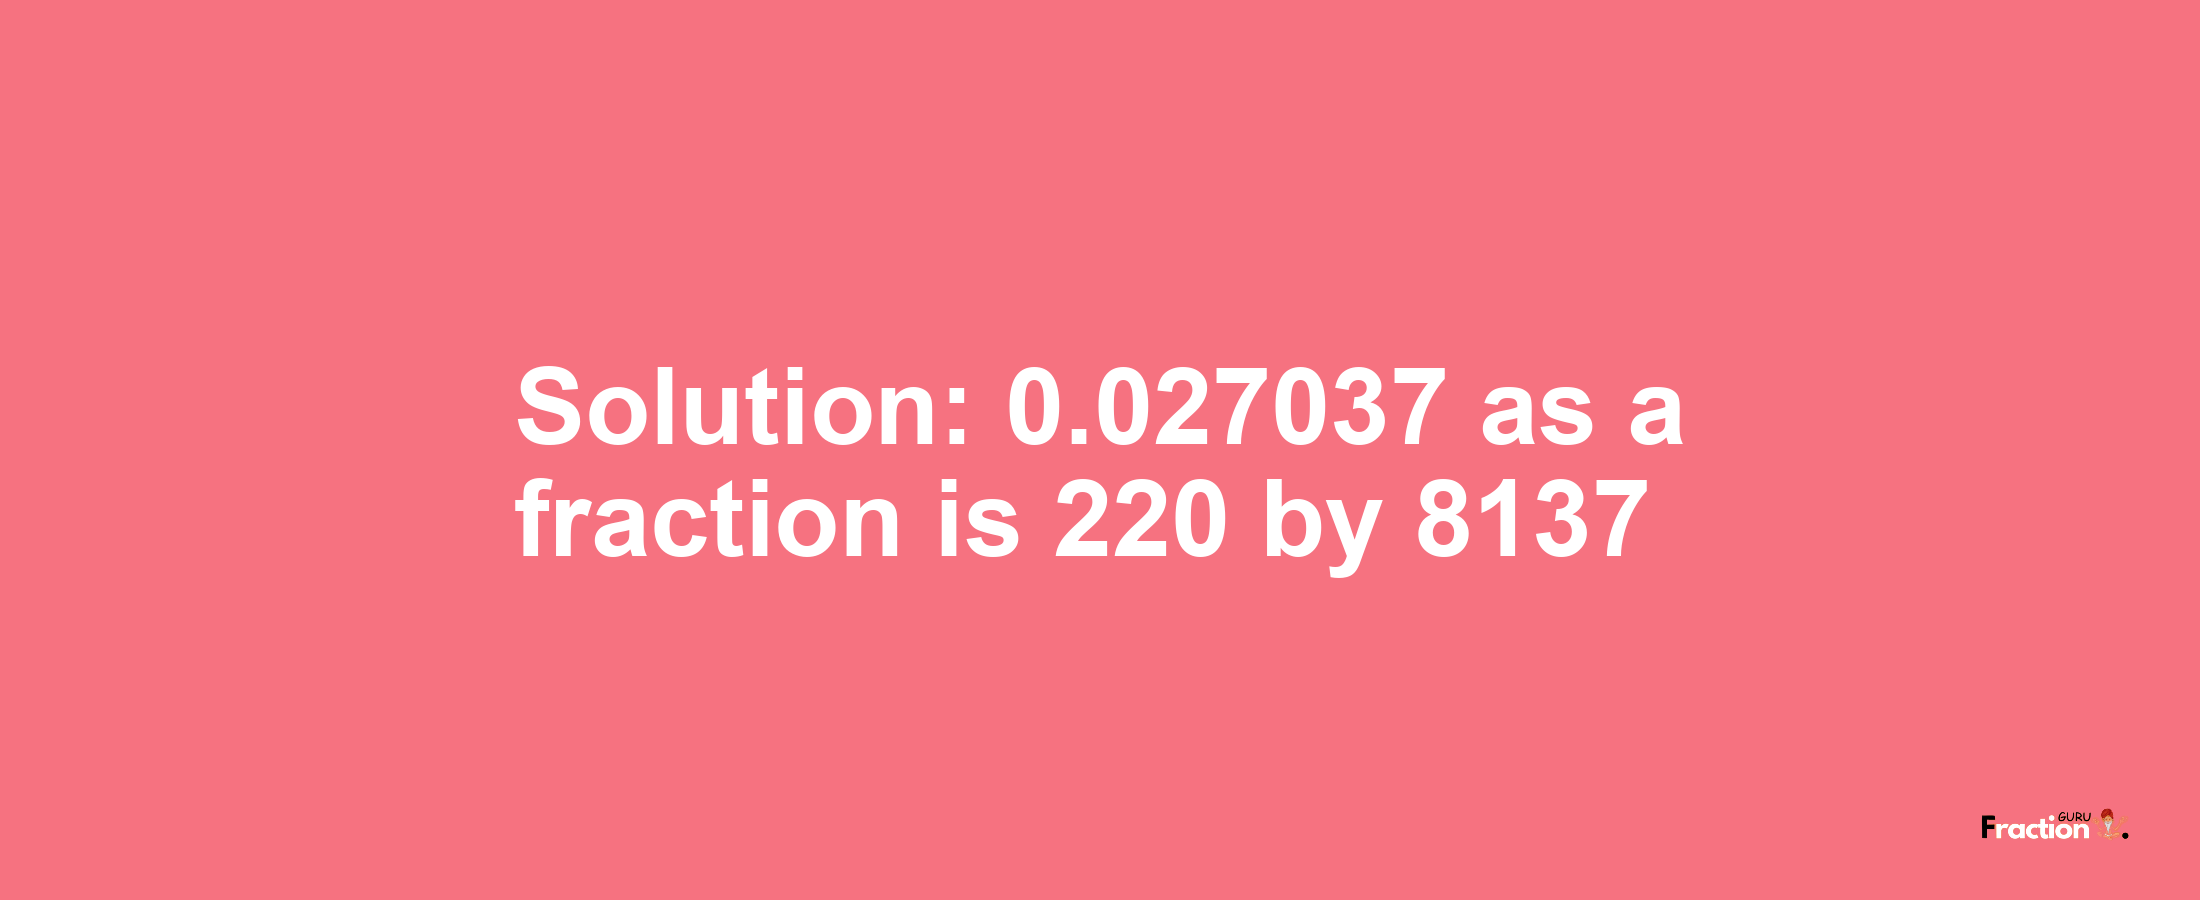 Solution:0.027037 as a fraction is 220/8137